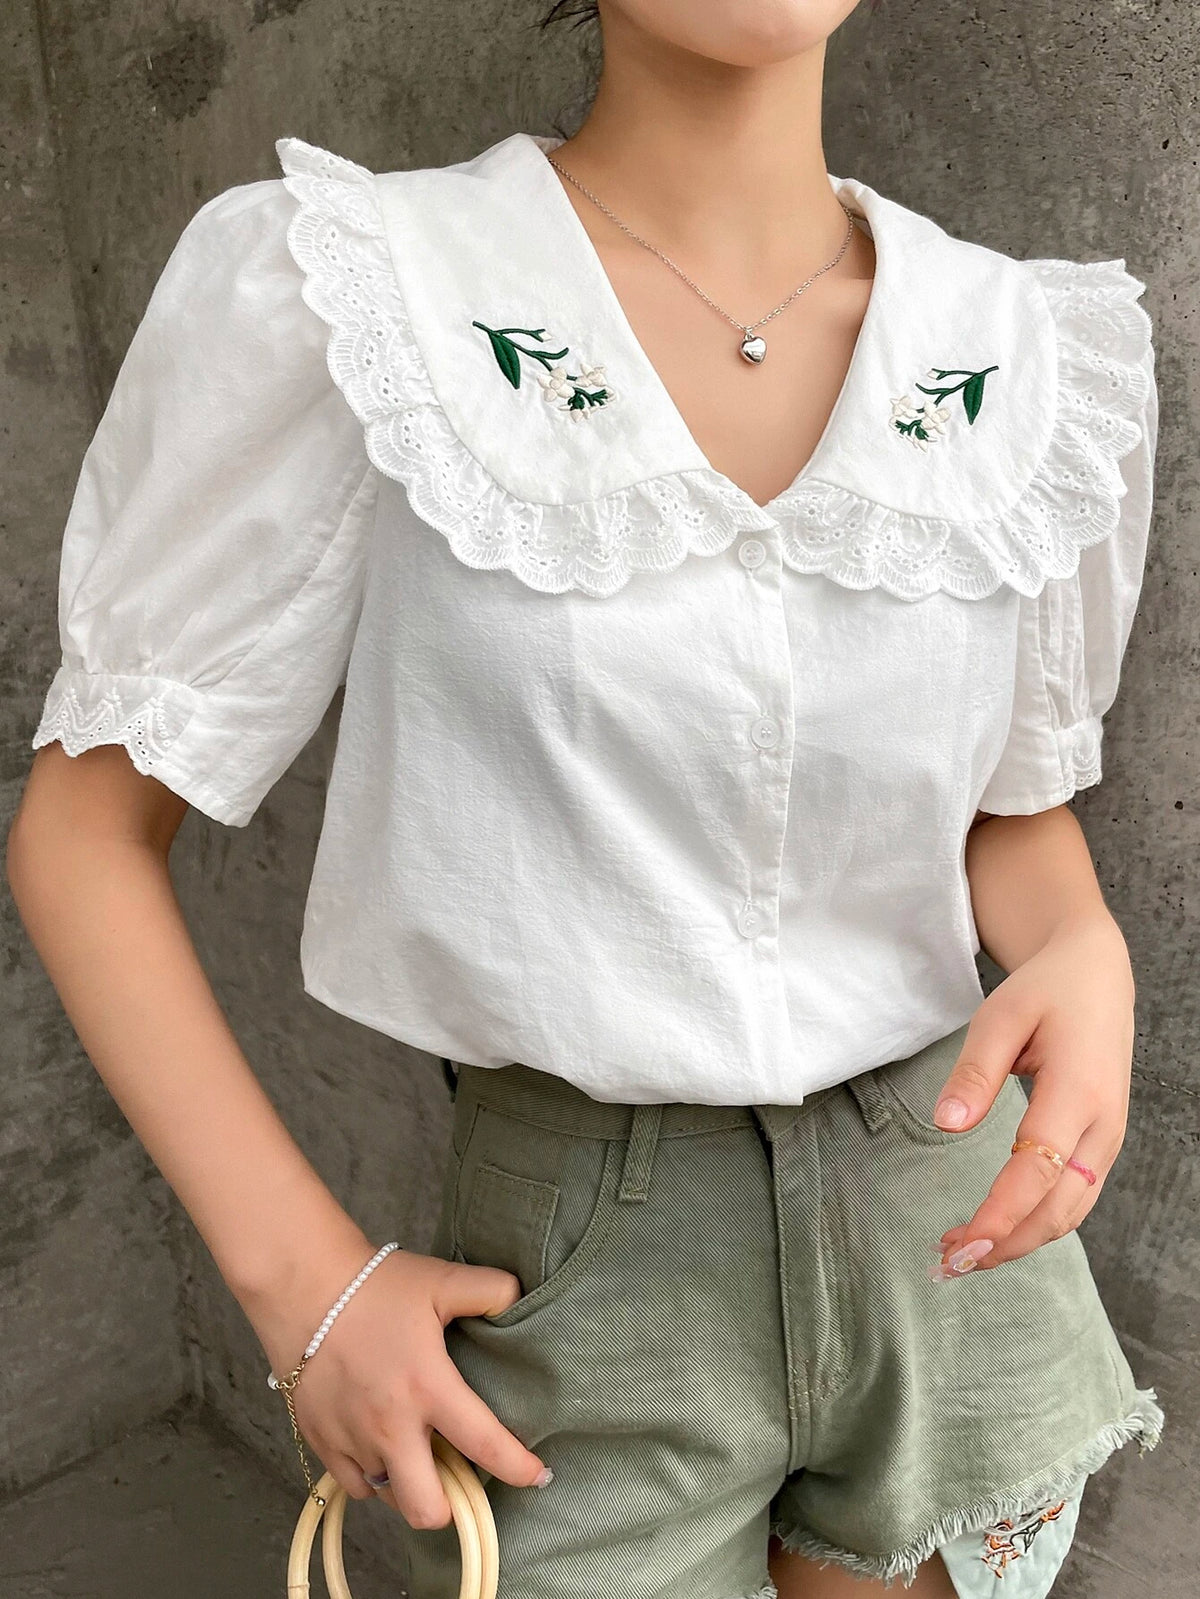 DAZY Floral Embroidery Statement Collar Puff Sleeve Shirt